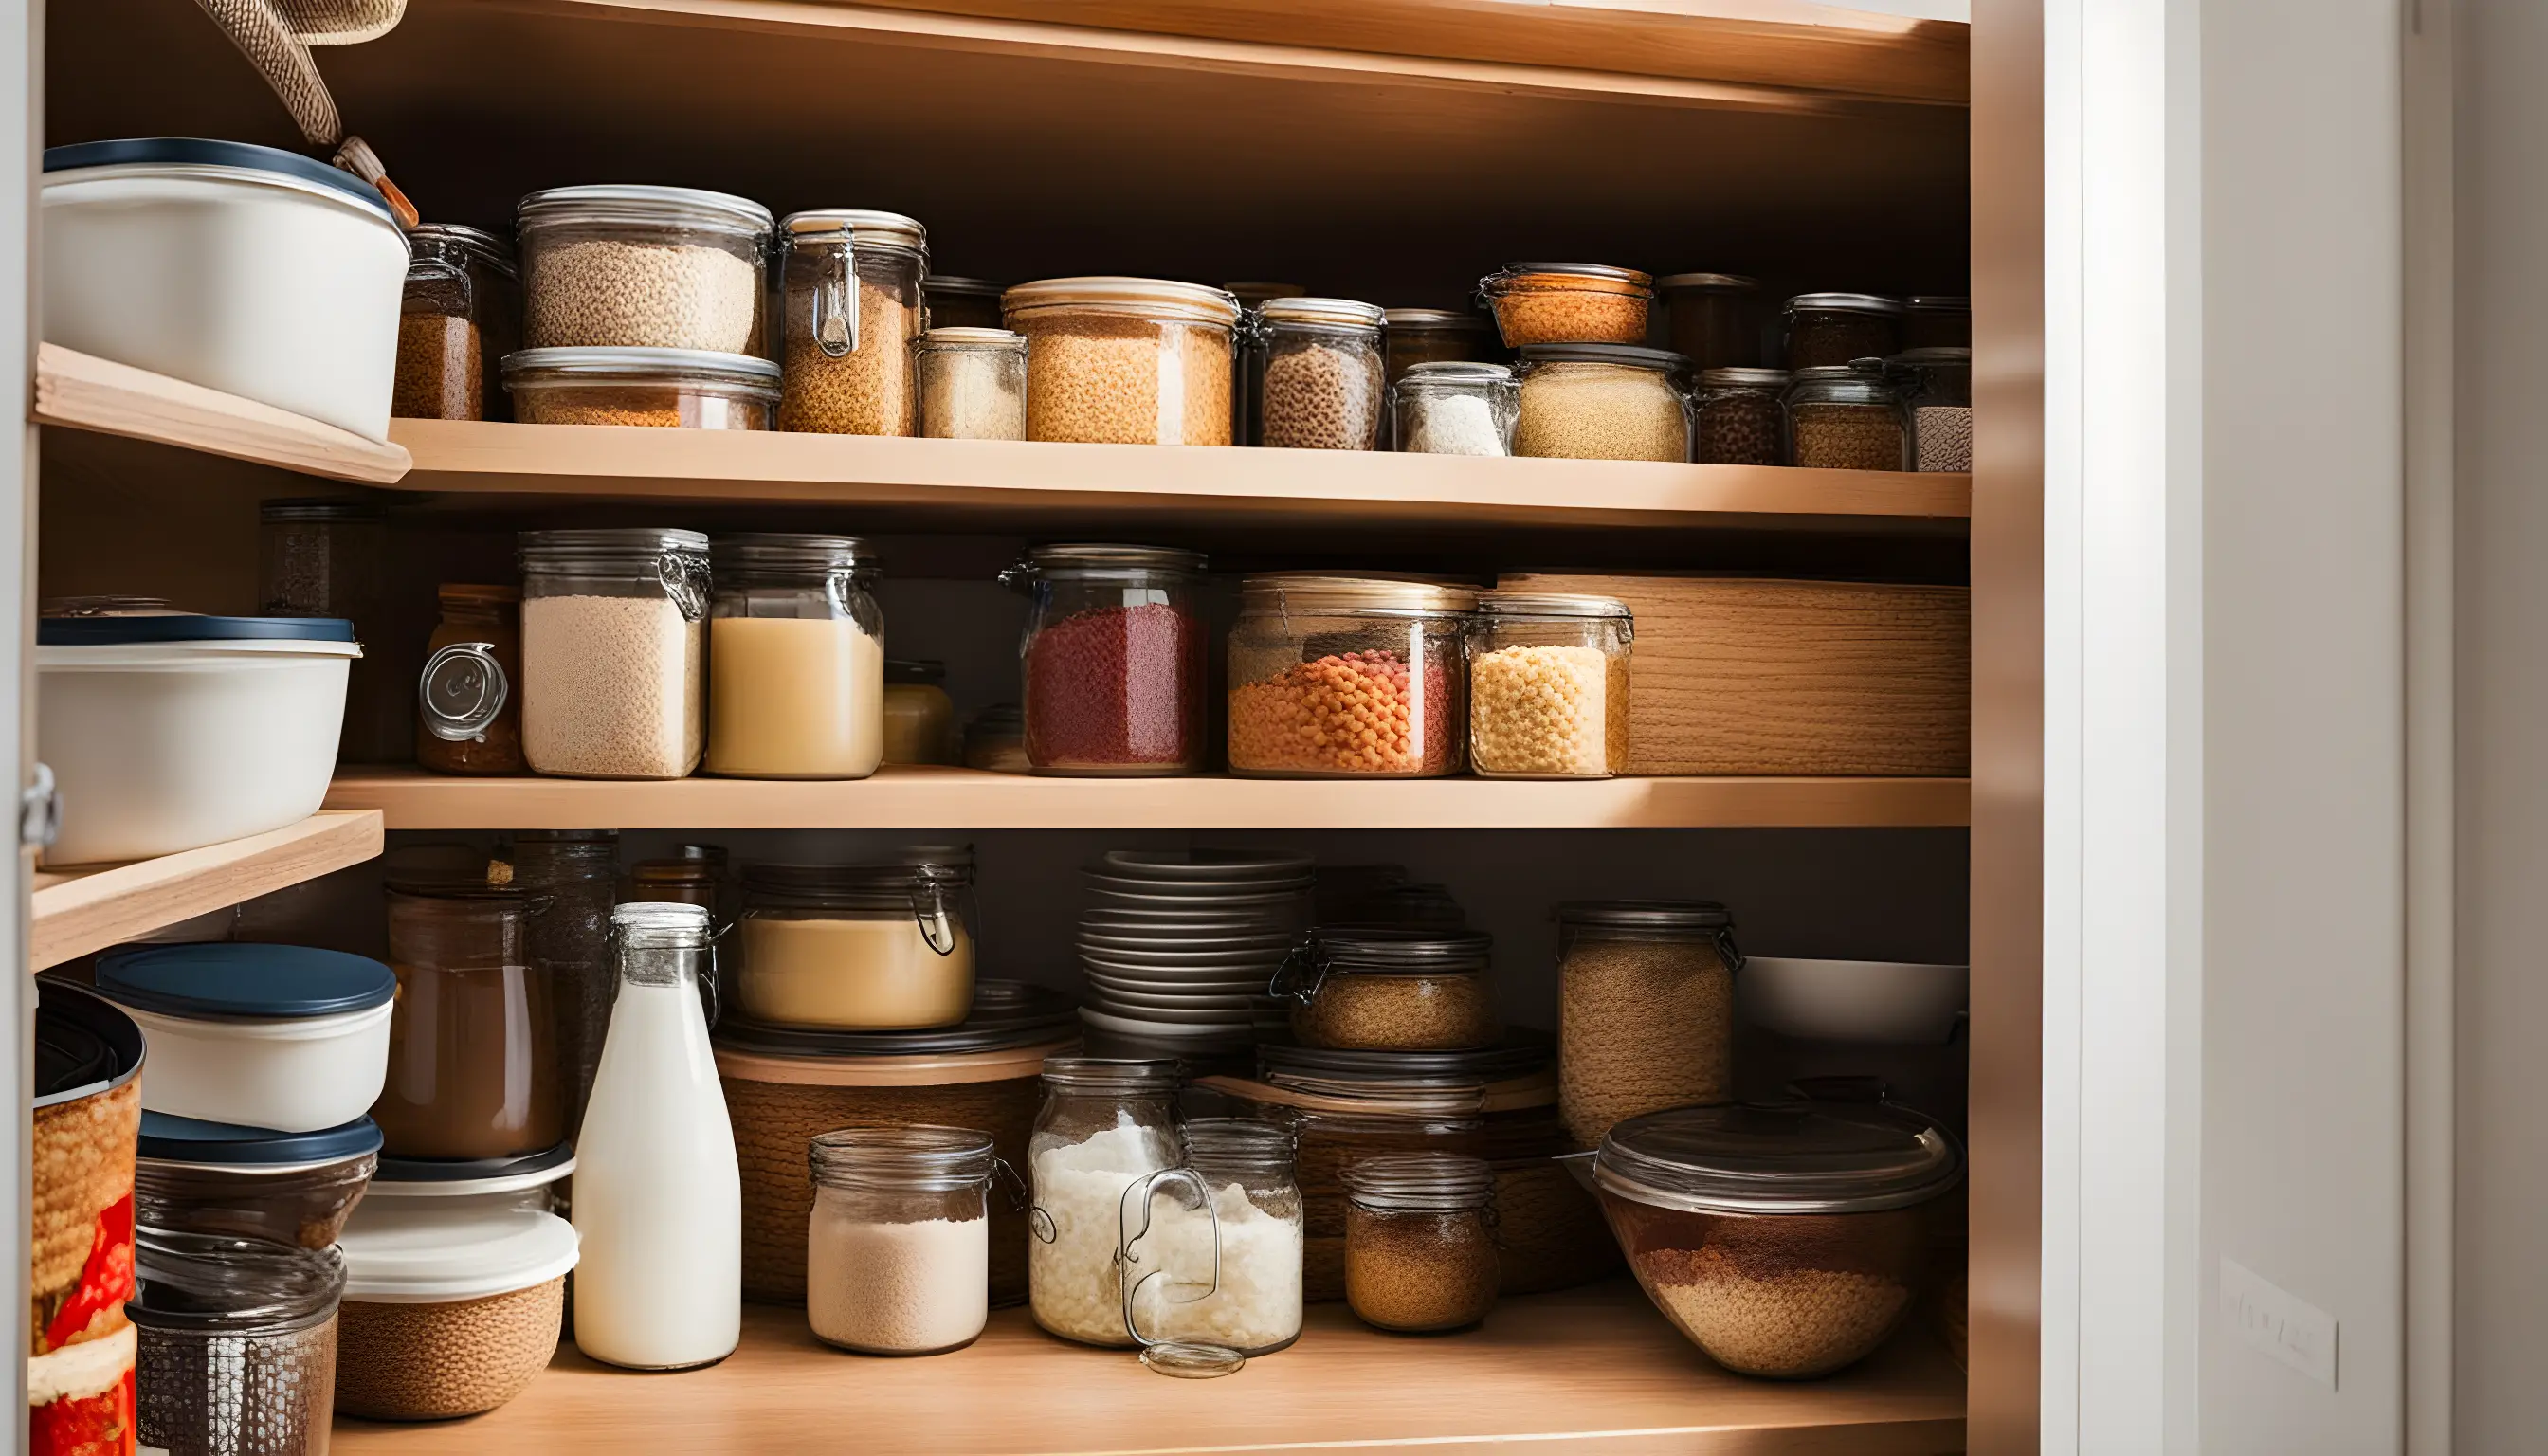 What Should Not Be Stored In A Pantry